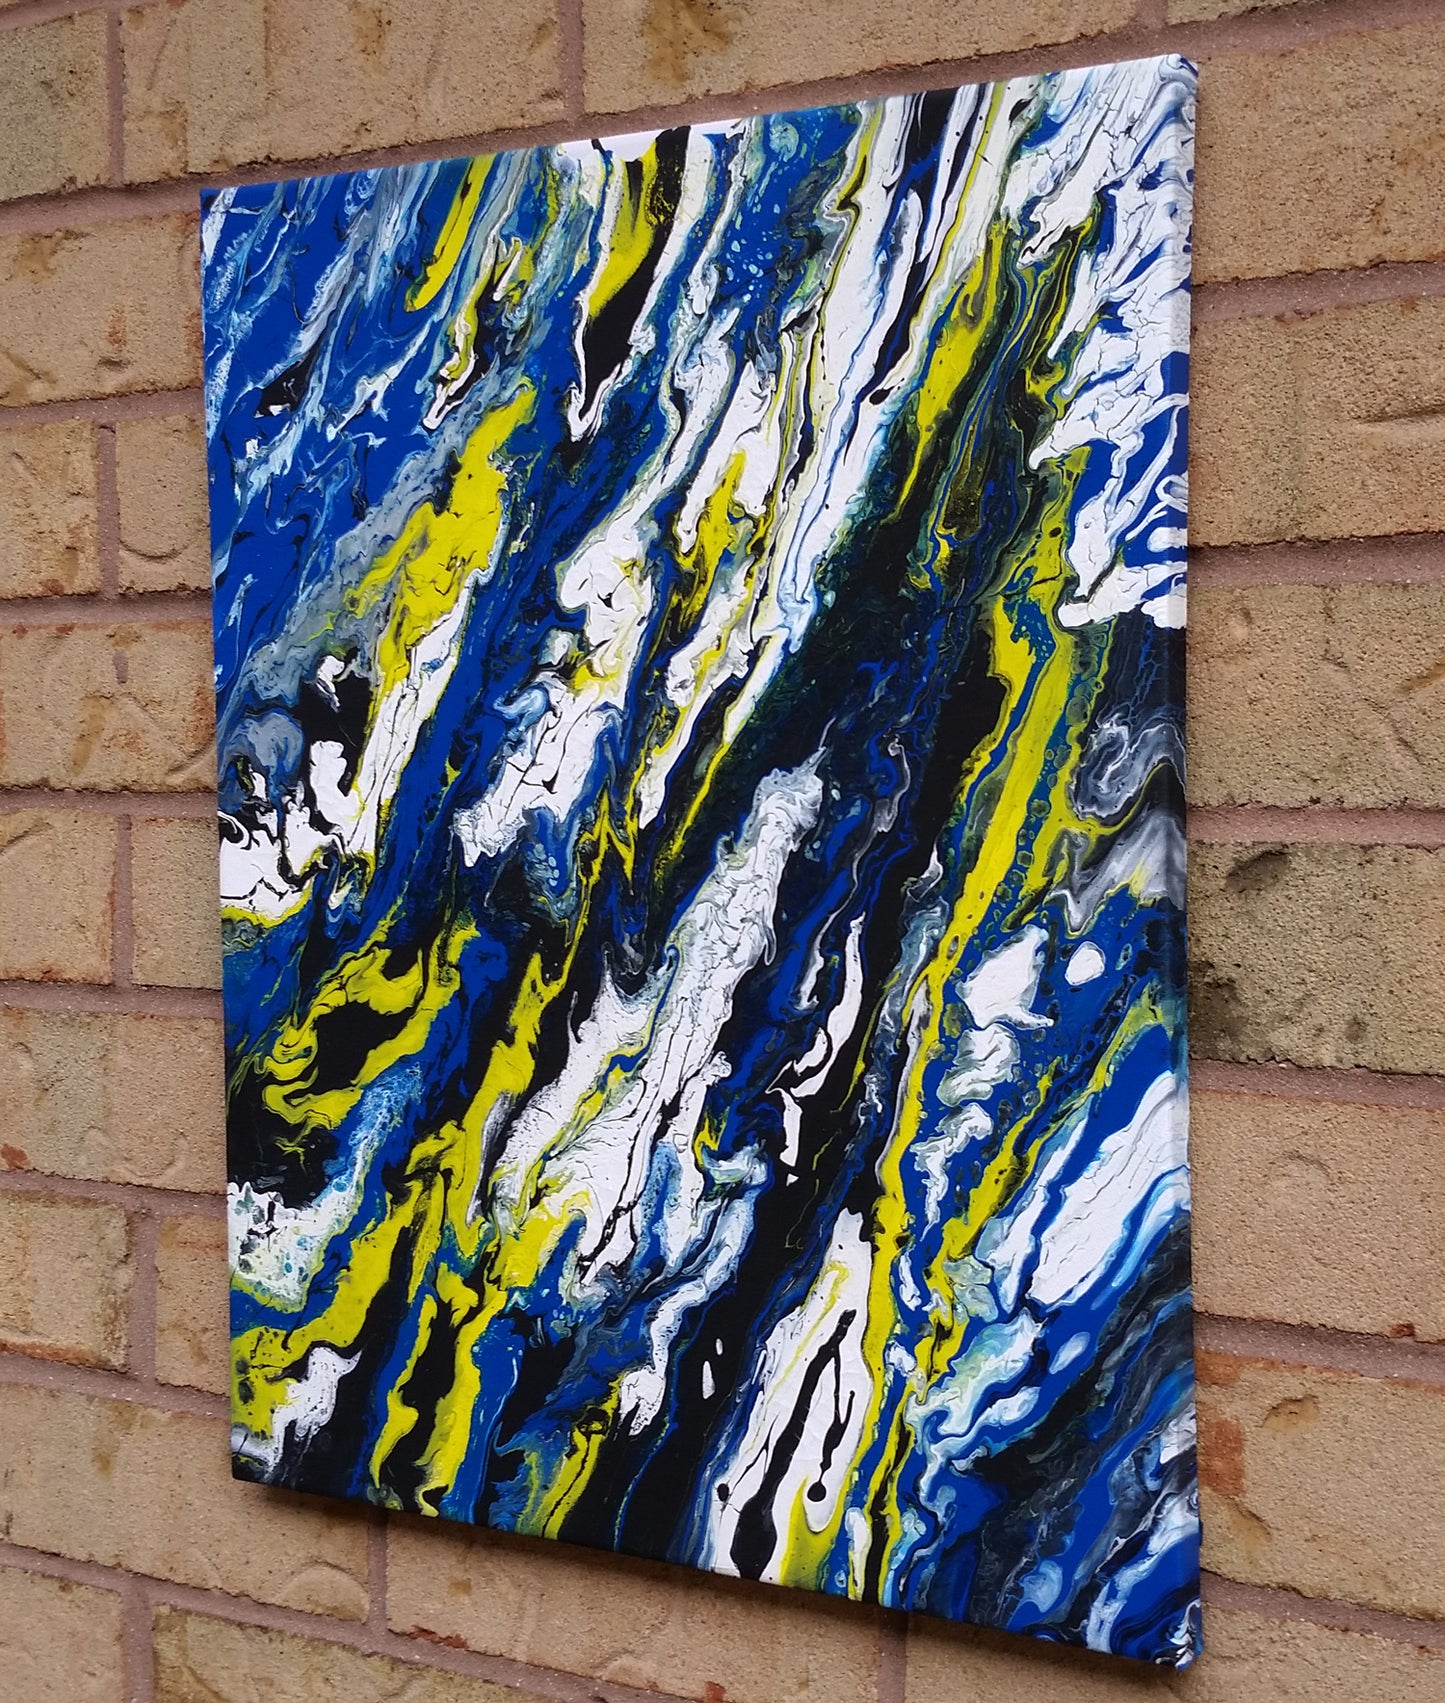 Ice-Age-by-Alexandra-Romano-Original-Abstract-Expressionism-Paintings-for-Sale-Blue-White-Yellow-Acrylic-on-Canvas-Art-Gallery-Toronto-Ontario-Canadian-Artist